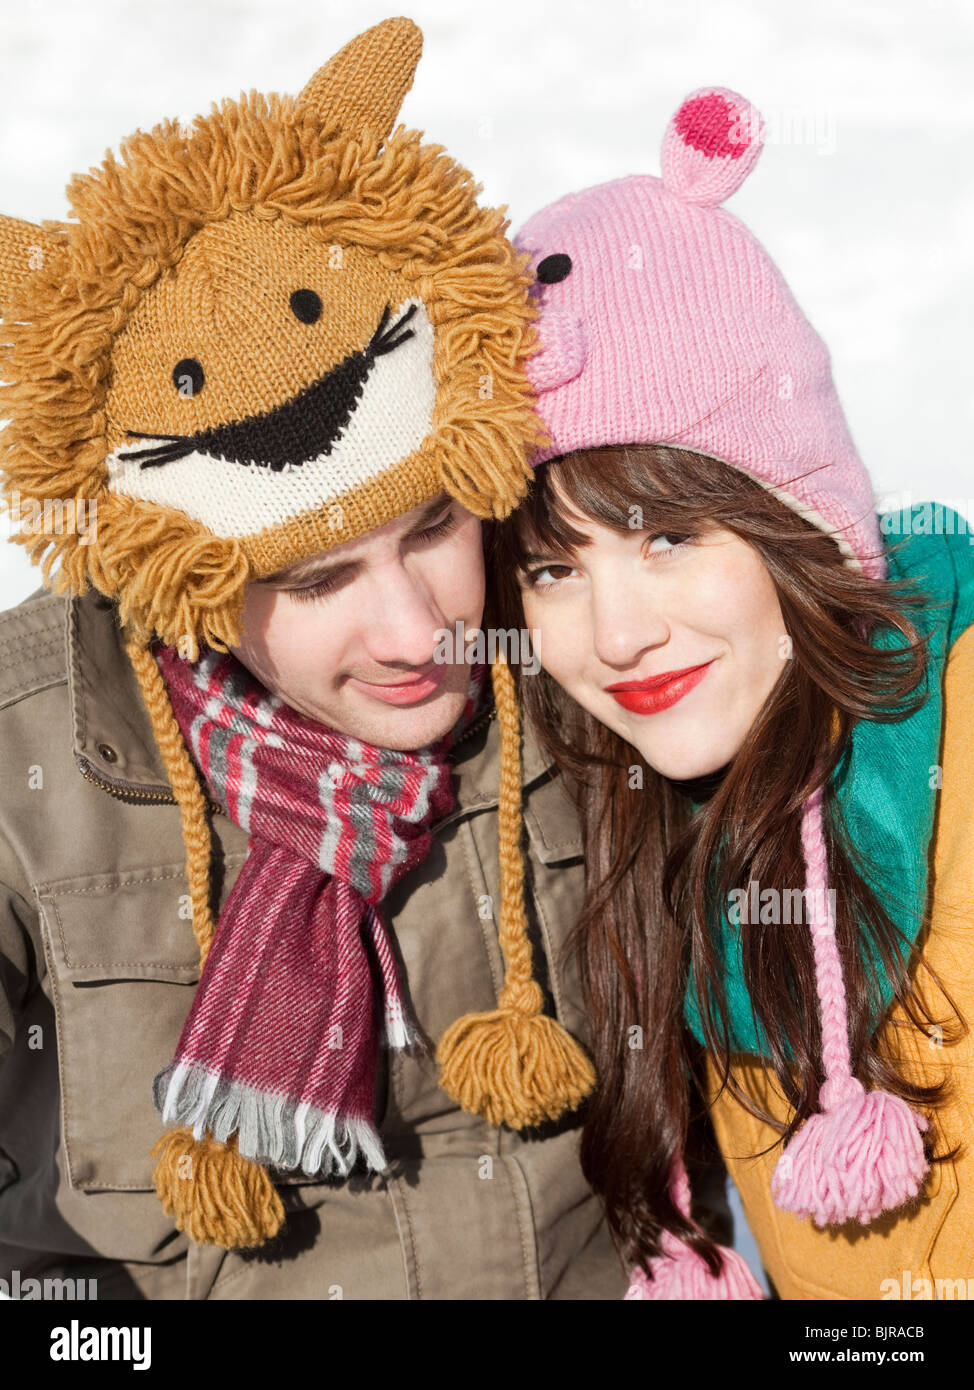 Knit Hats High Resolution Stock Photography and Images - Alamy